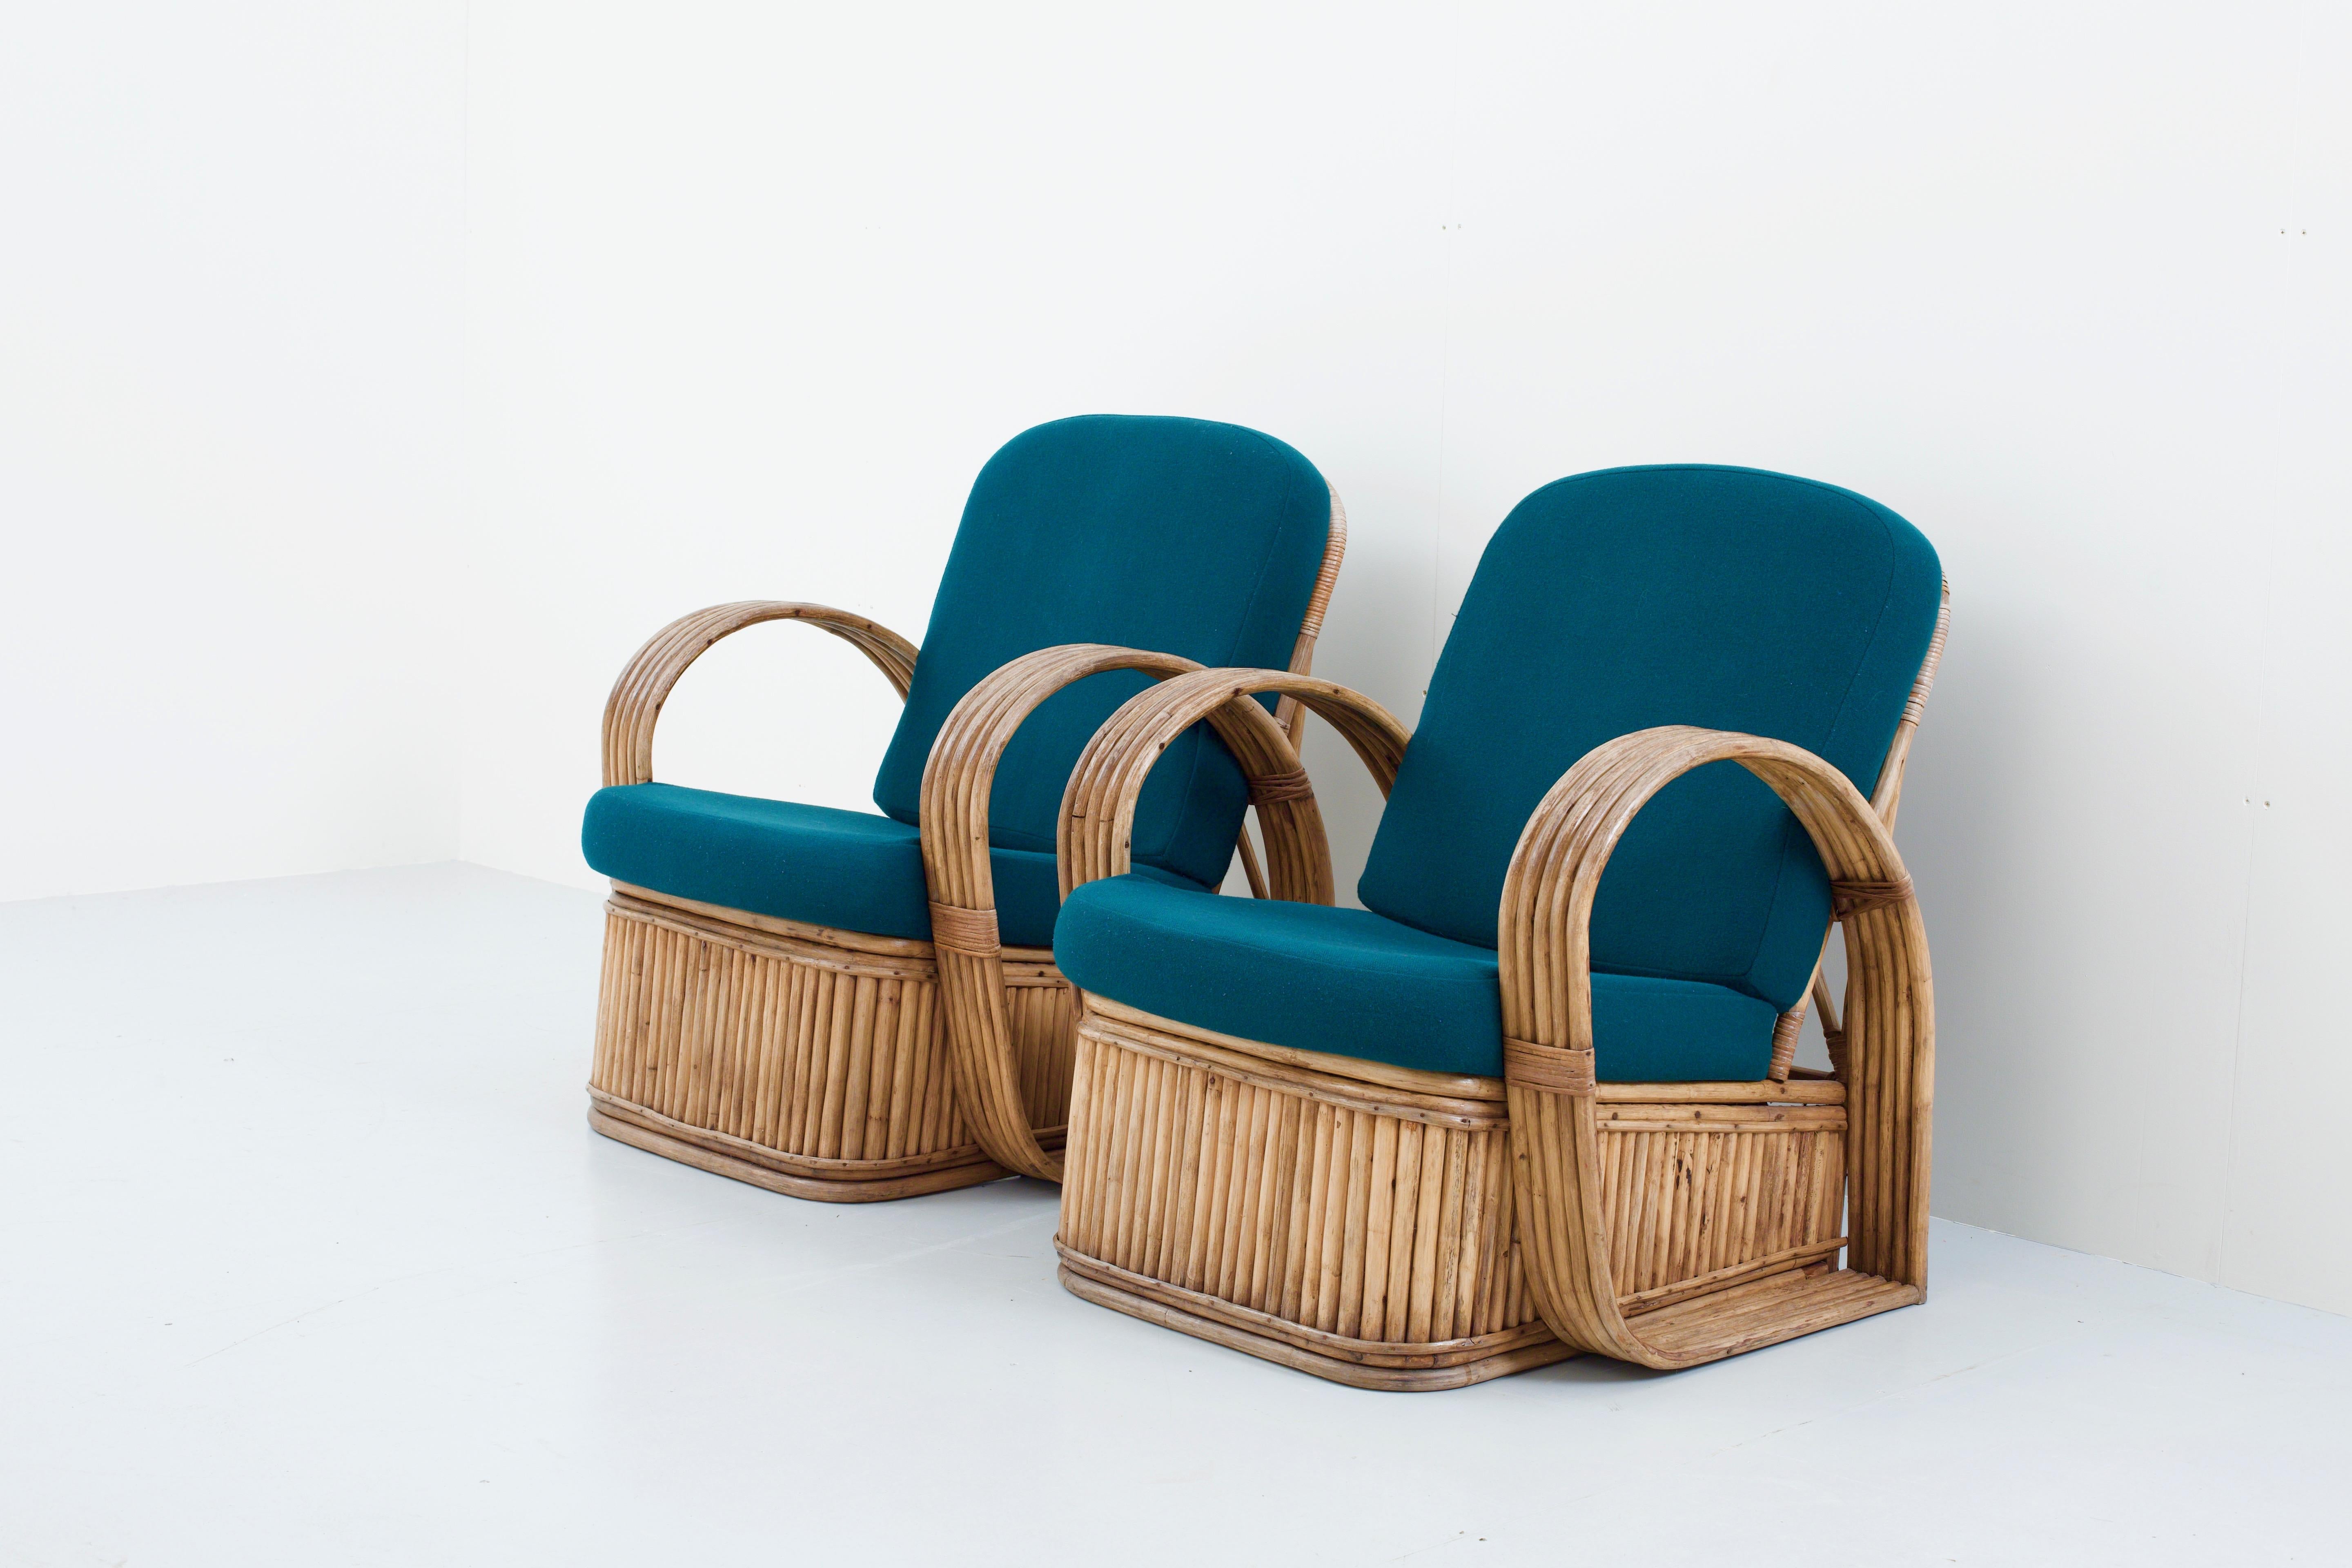 Two typical Bohemian rattan chairs in very good condition. The cushions have been reupholstered recently with green wool so they are quite fresh. The design is striking because of the contrast between the rounded arm legs and the straight rattan